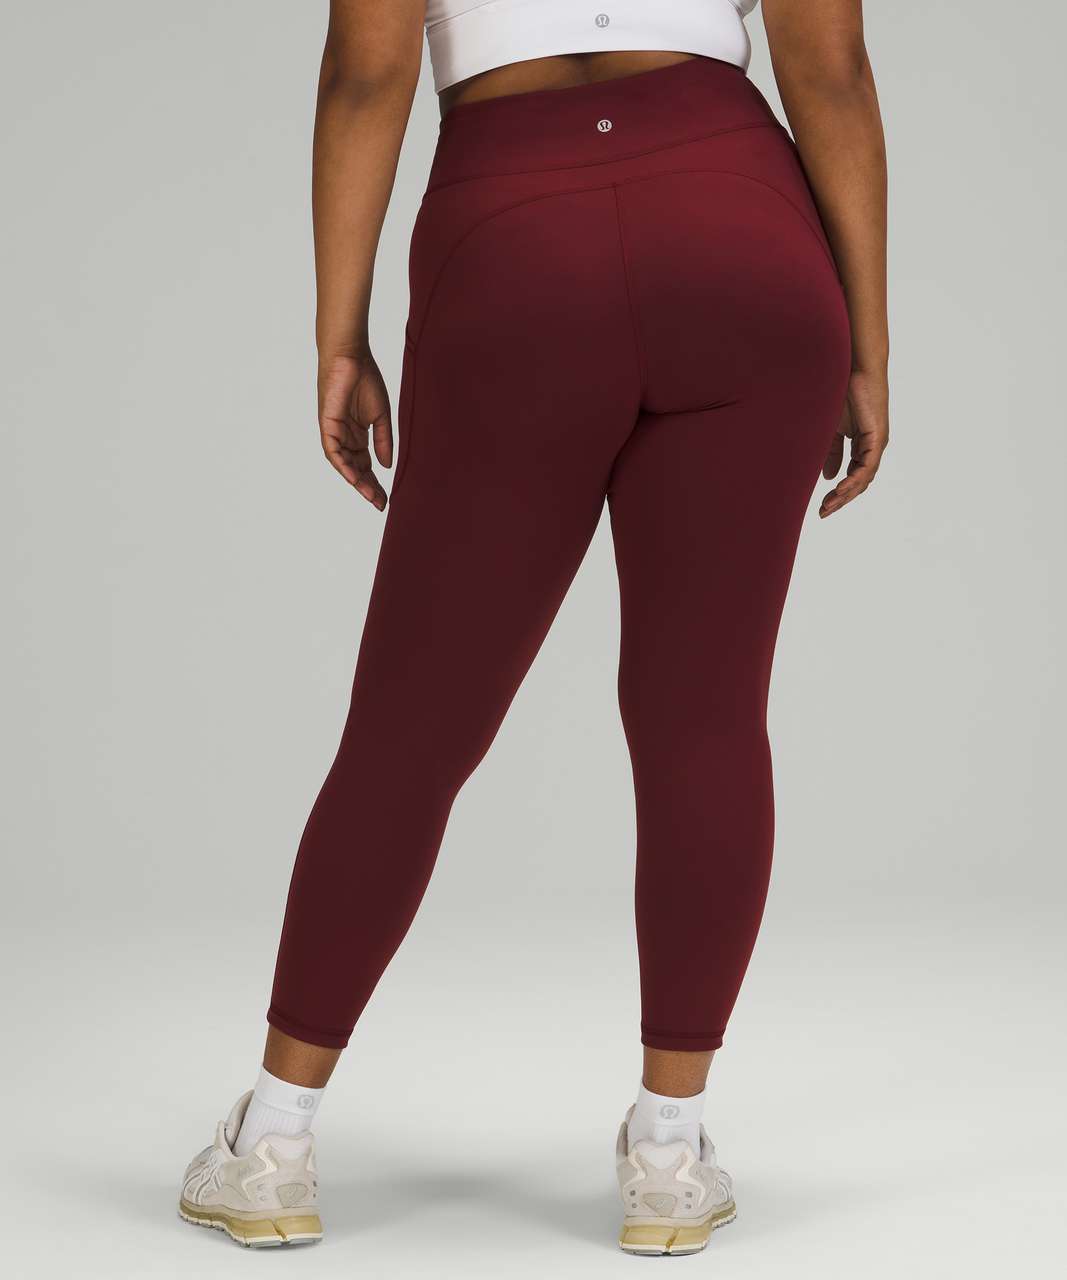 YogaSix - New lululemon]] just dropped! 🤩 This Red Merlot color is perfect  for the holiday season! ⭐️ Align High Waisted Legging by lululemon]] ⭐️  Flow Y Nulu Bra by lululemon]] ⭐️